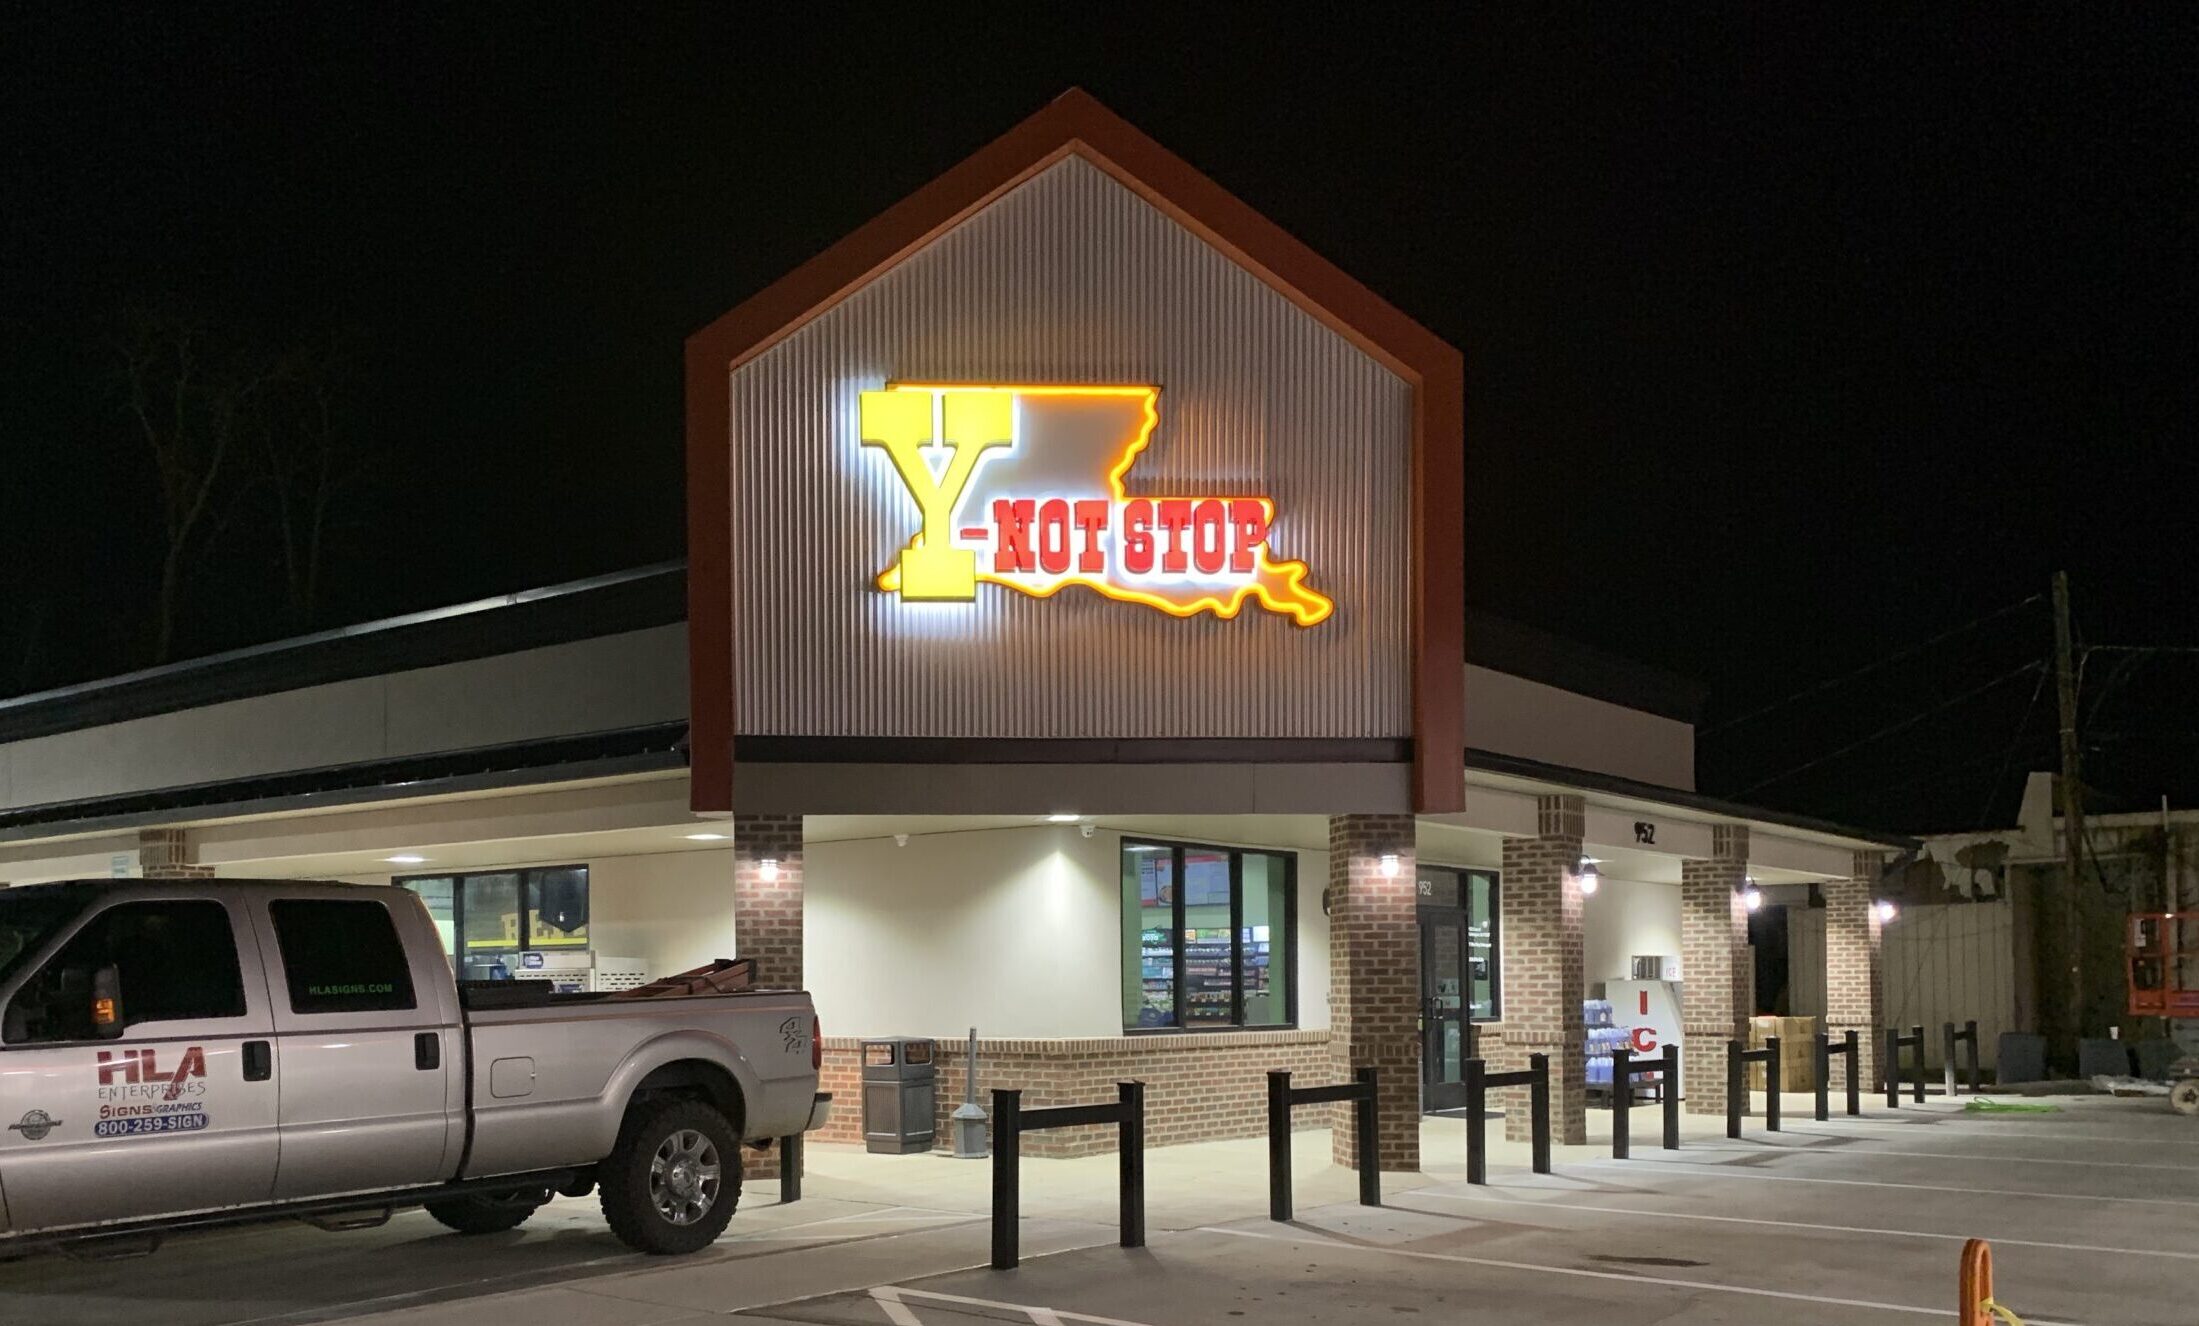 Y-Not Stop Shell Convenience Store Sign, Business Logo Sign, LED Lighting, Cottonport, Louisiana, HLA Signs